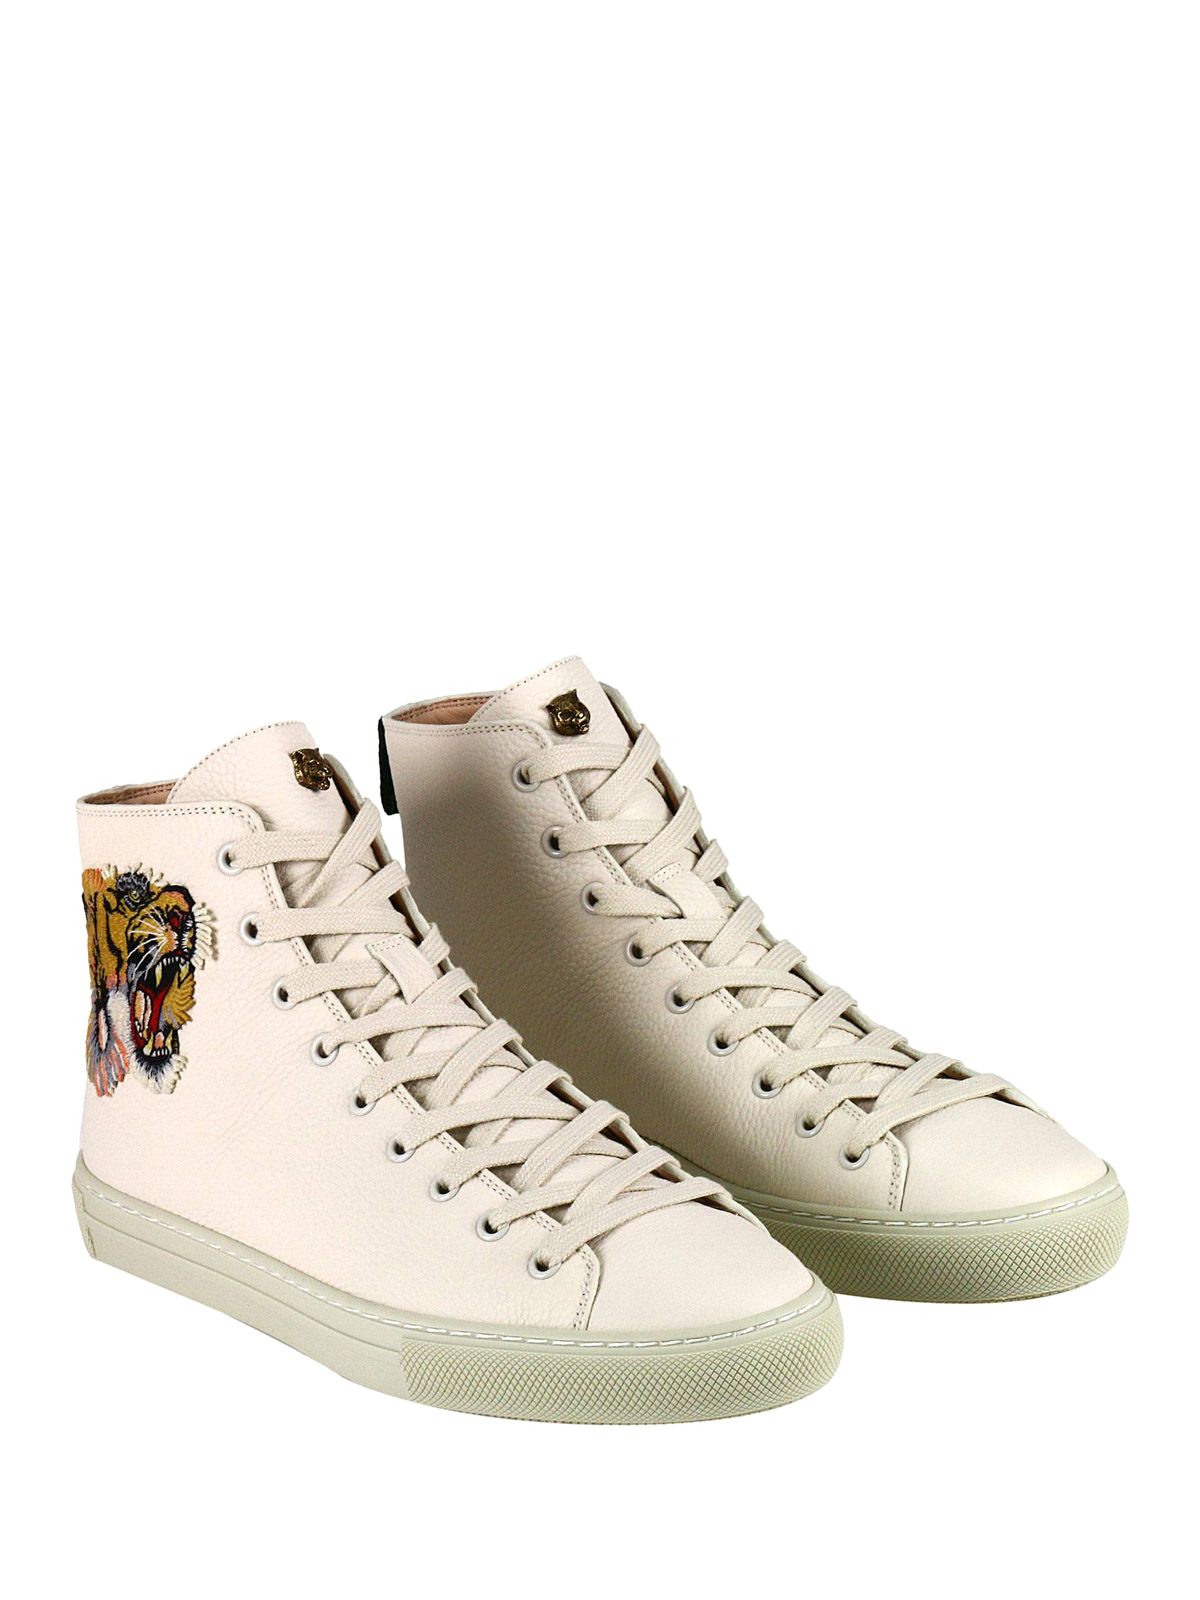 Habitat besværlige fiber Trainers Gucci - Tiger embroidered high top sneakers - 478337BXOA09064